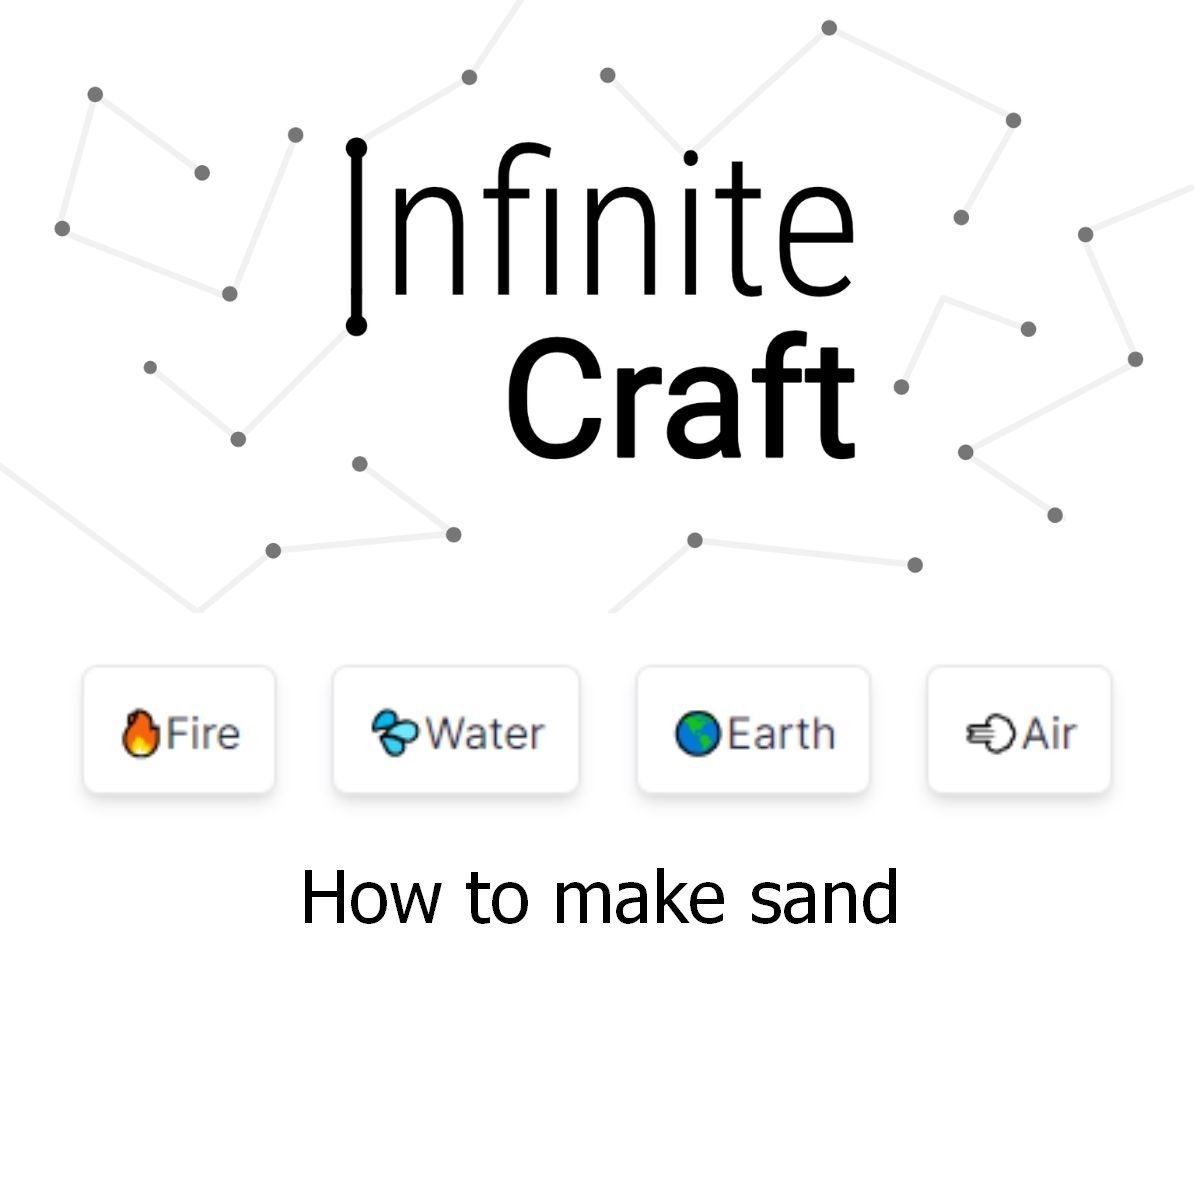 how to make sand in infinite craft